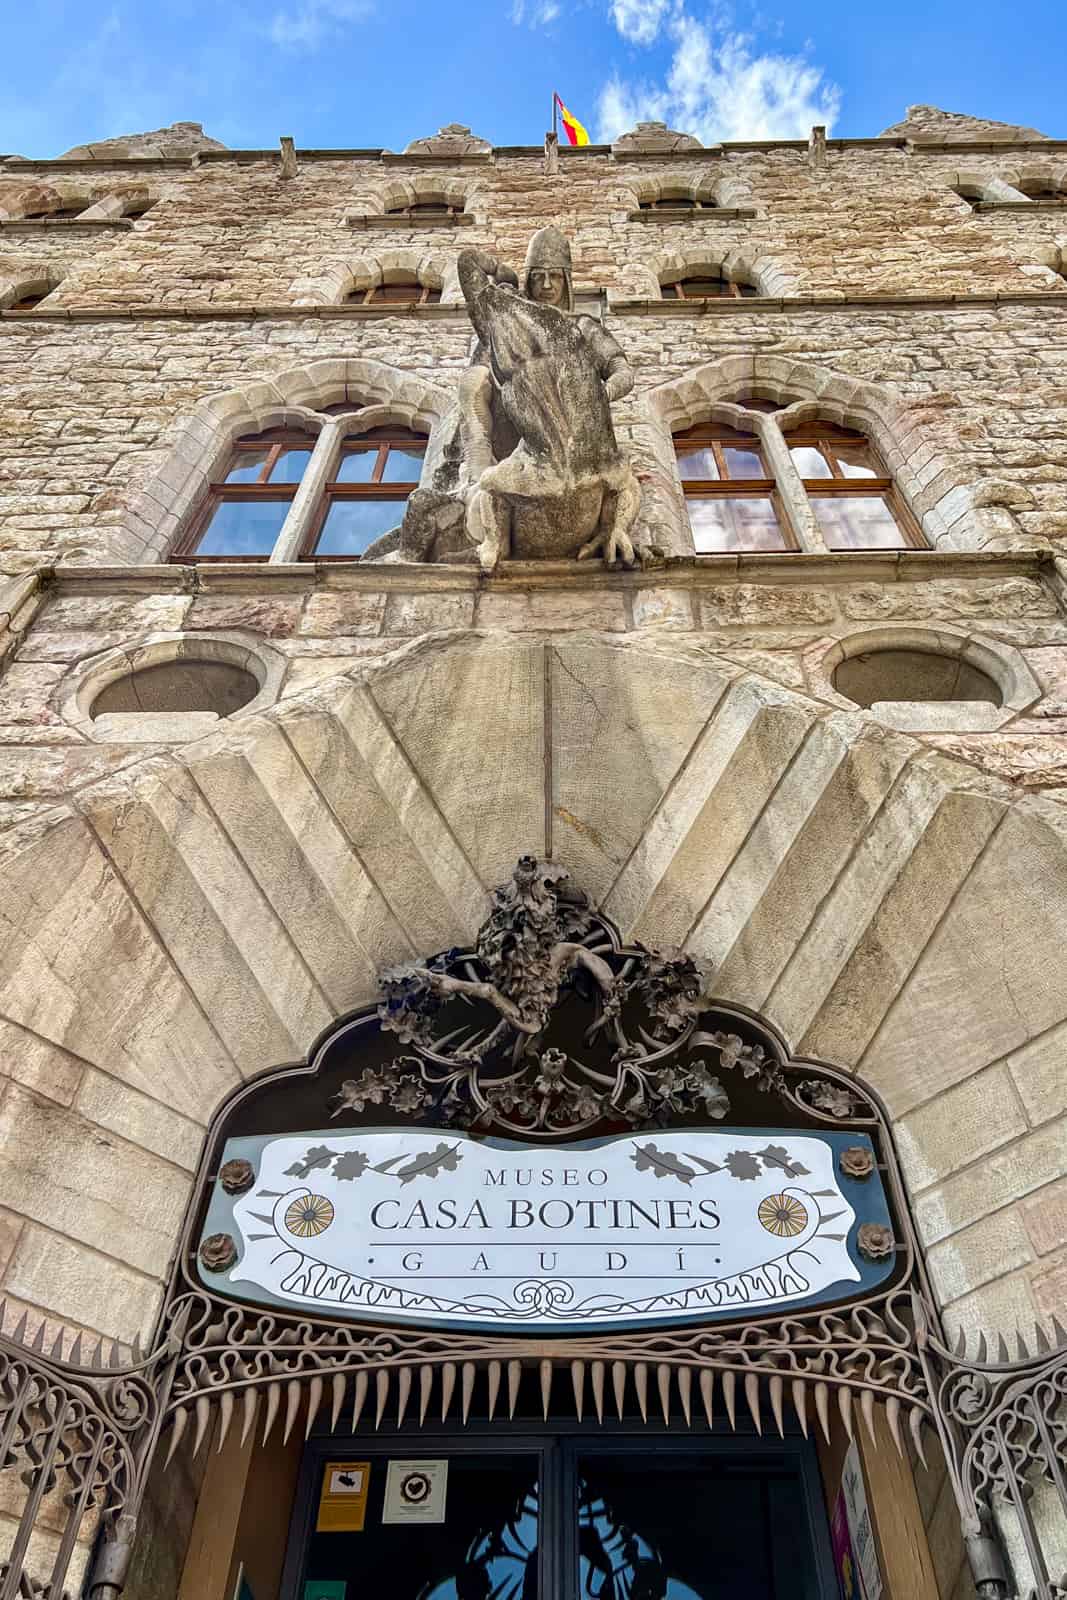 Limestone sculpture of Saint George slaying a dragon above the entrance to Case Botines in León, Spain. 